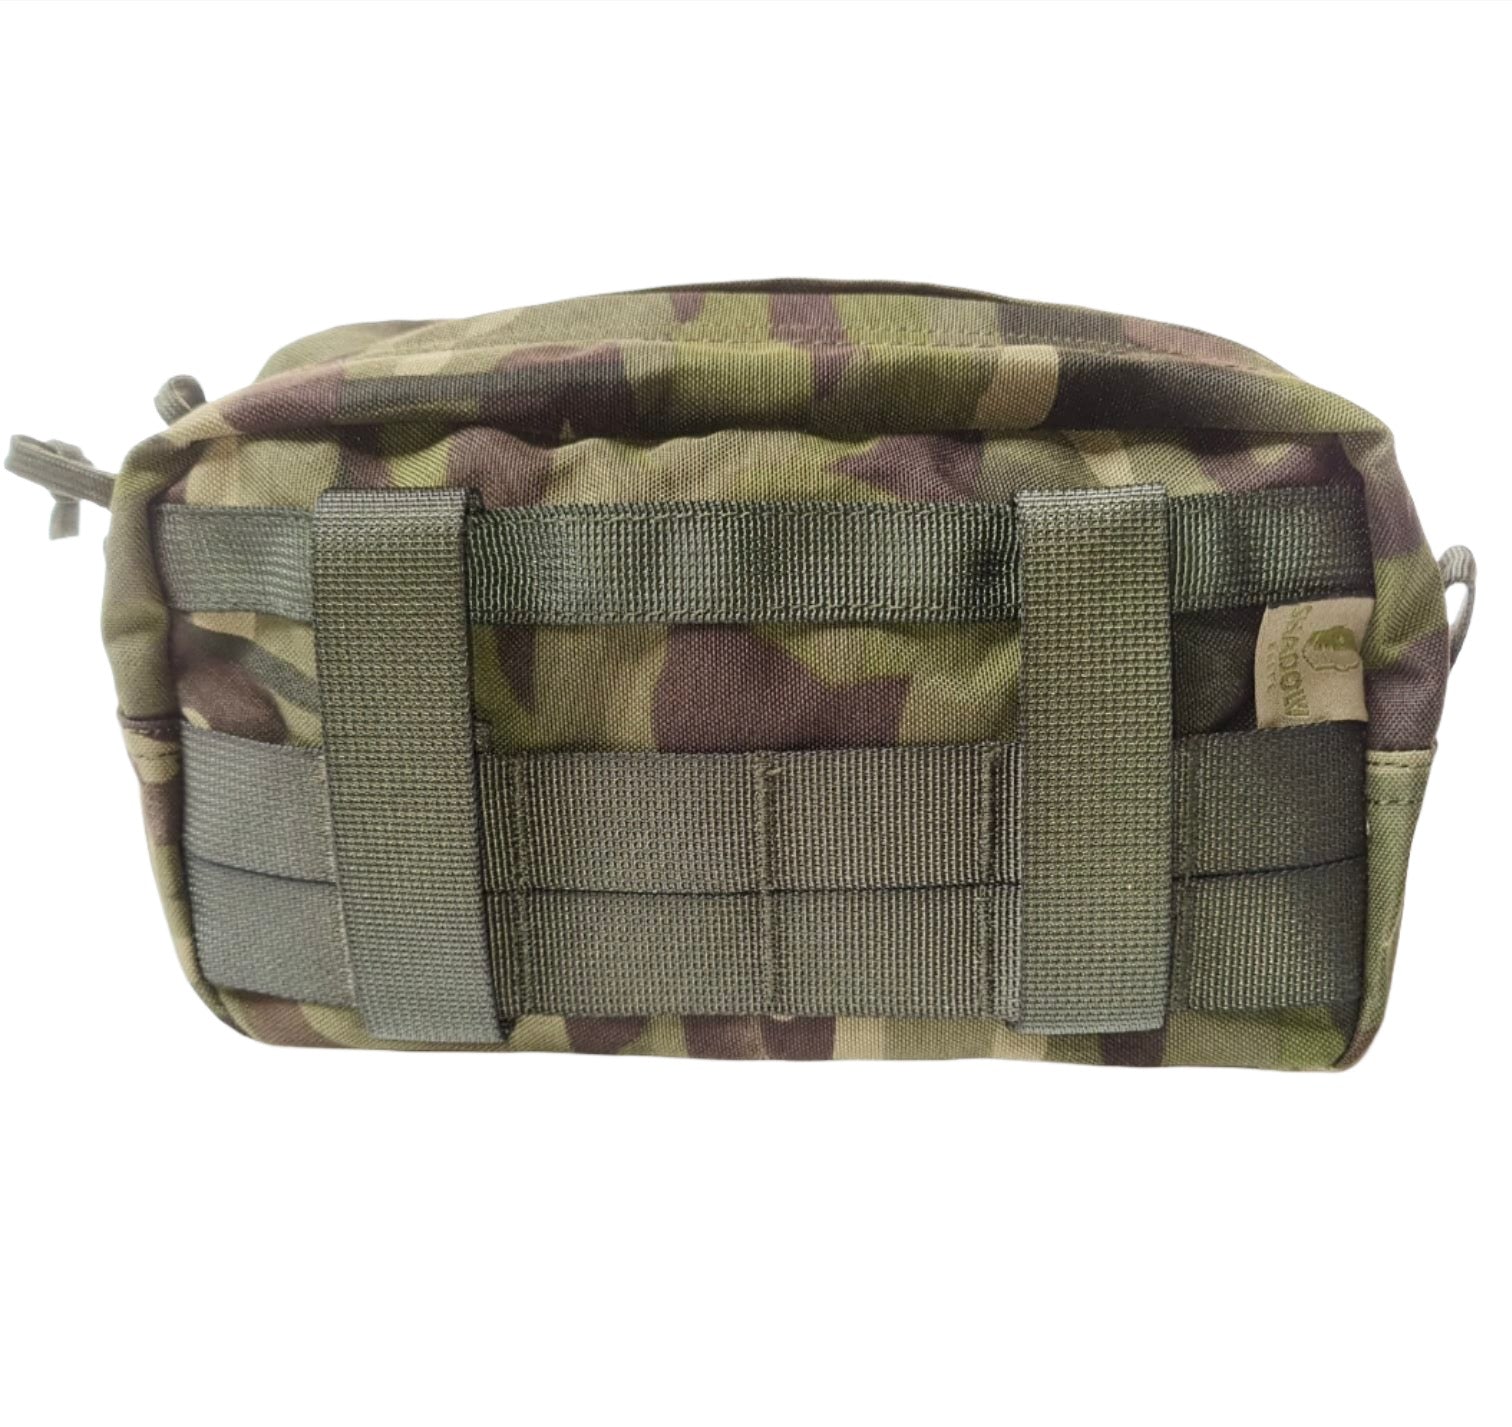 SHE-1421 HORIZONTAL UTILITY POUCH - MULTICAM GREEN